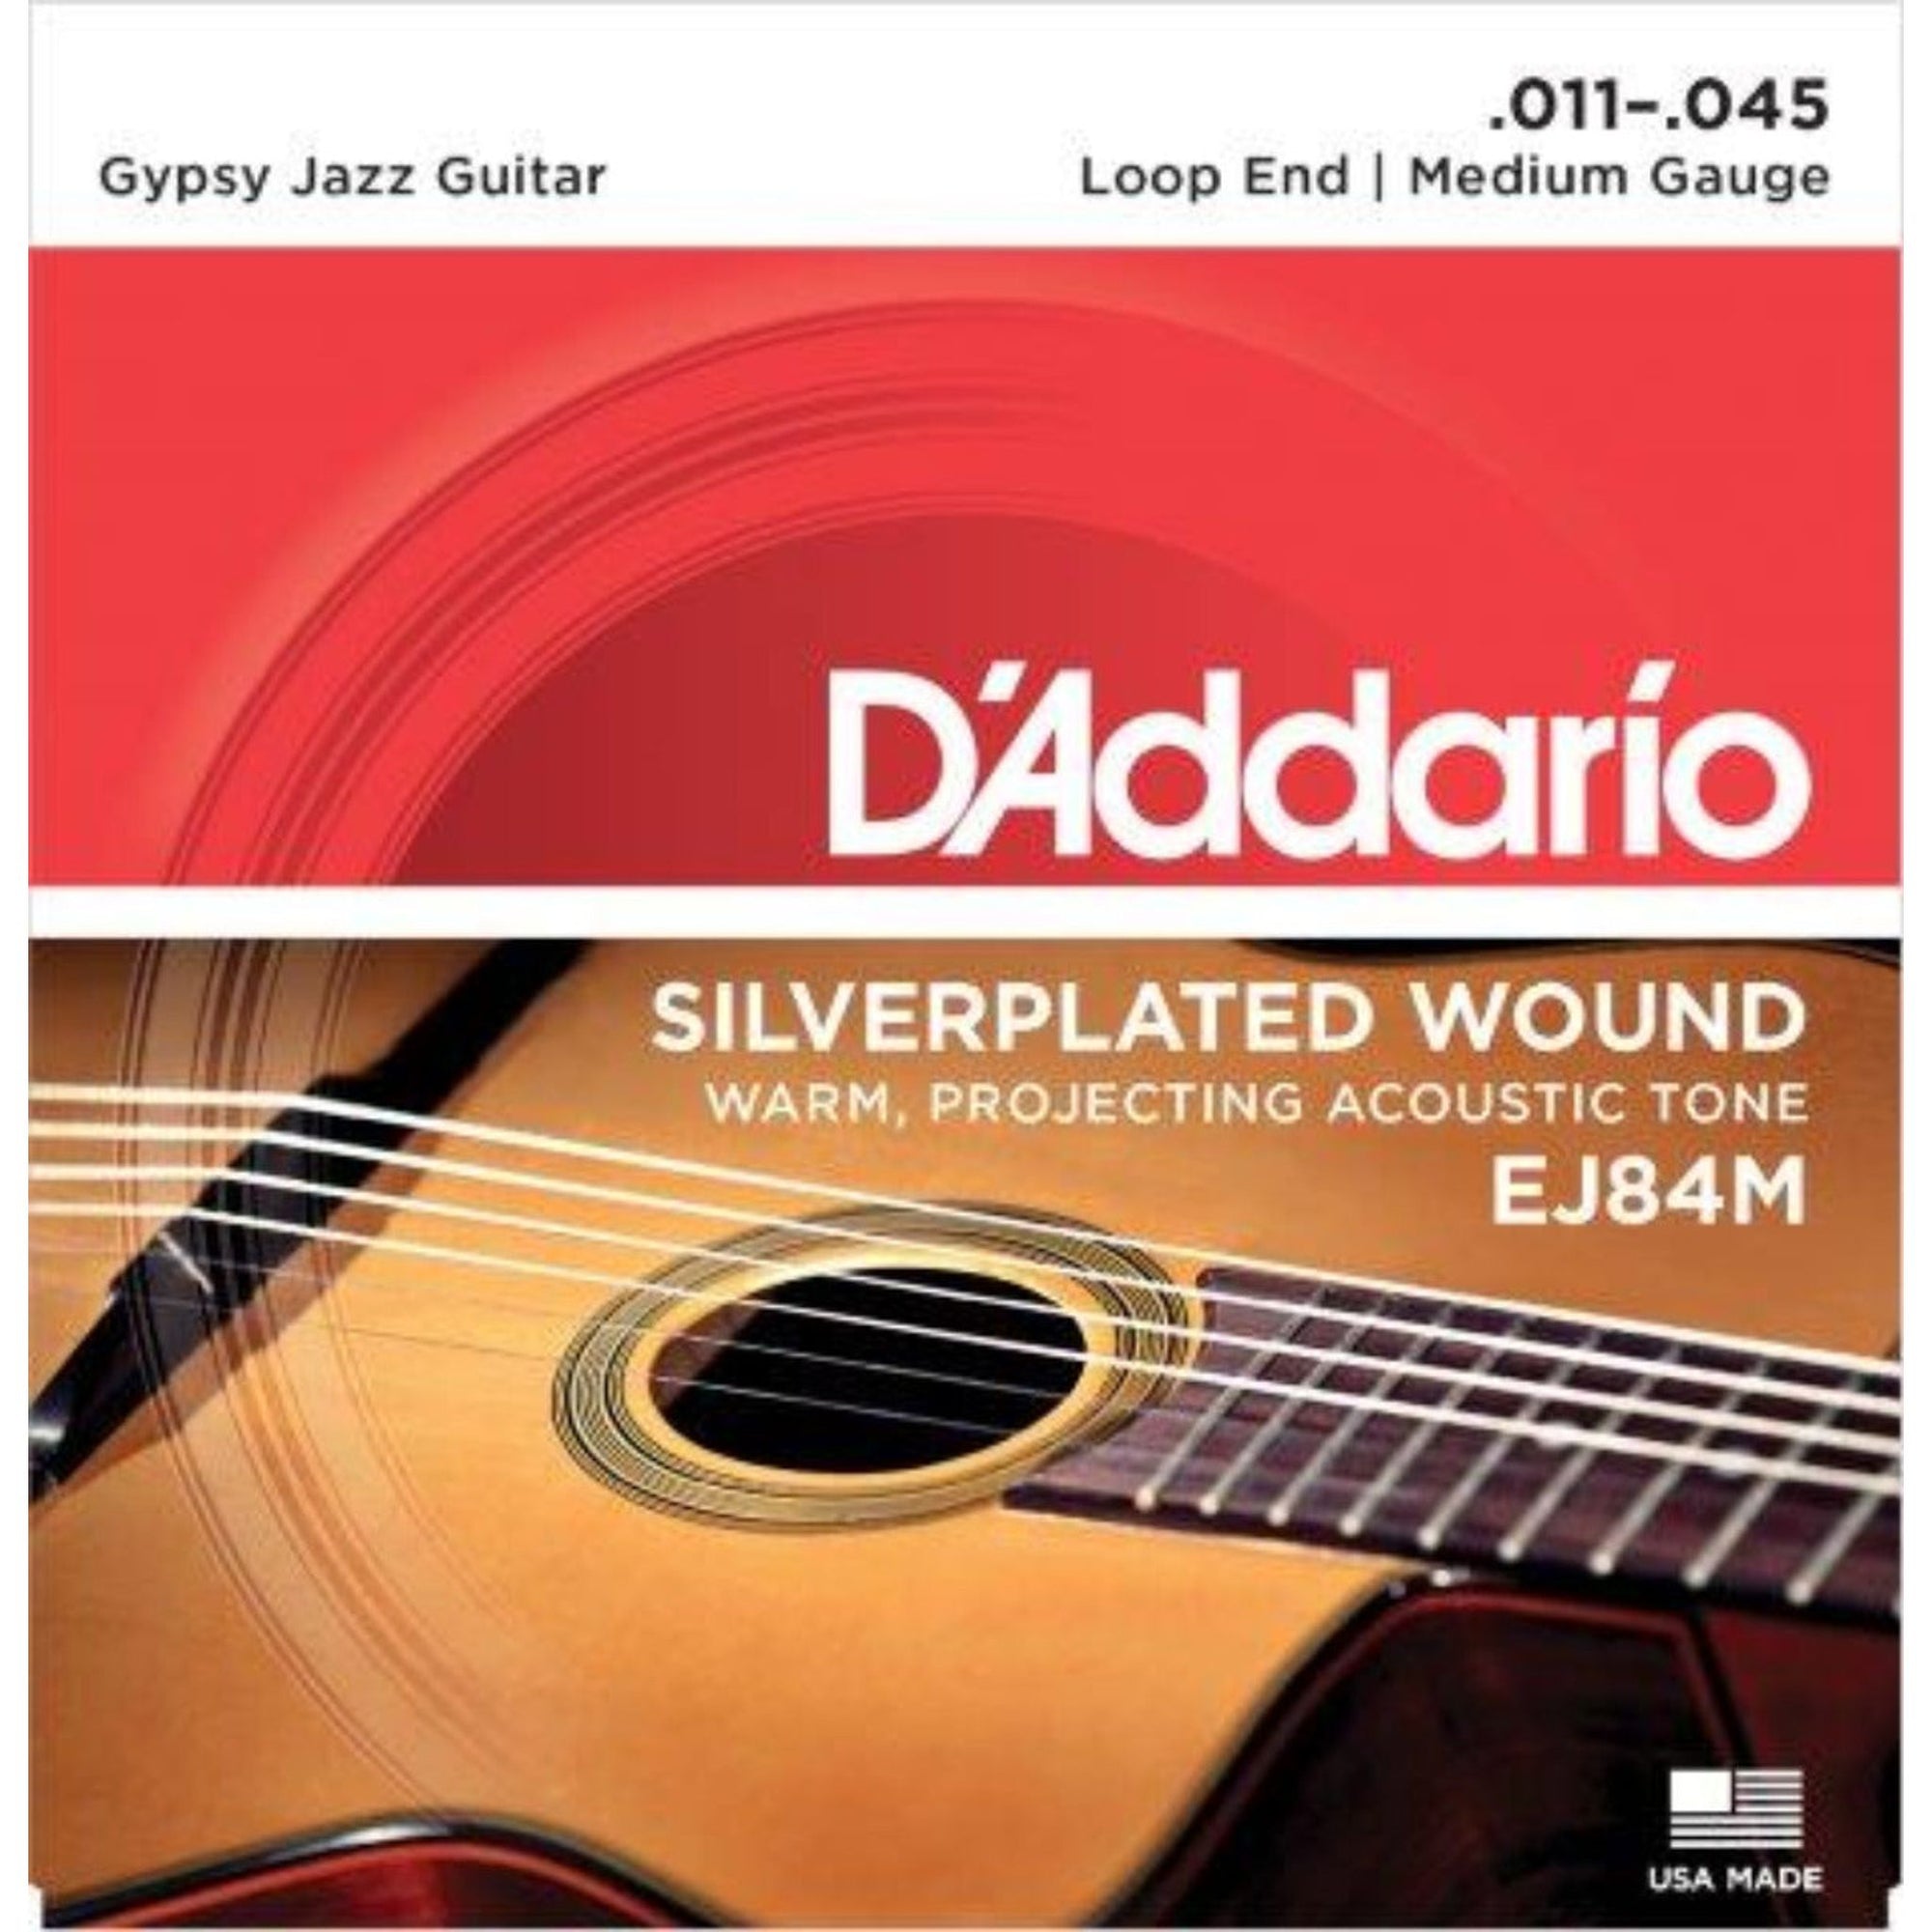 EJ84M loop end gypsy jazz acoustic guitar strings are designed and gauged for rhythm and strumming patterns associated with "Django", jazz-style guitar. 